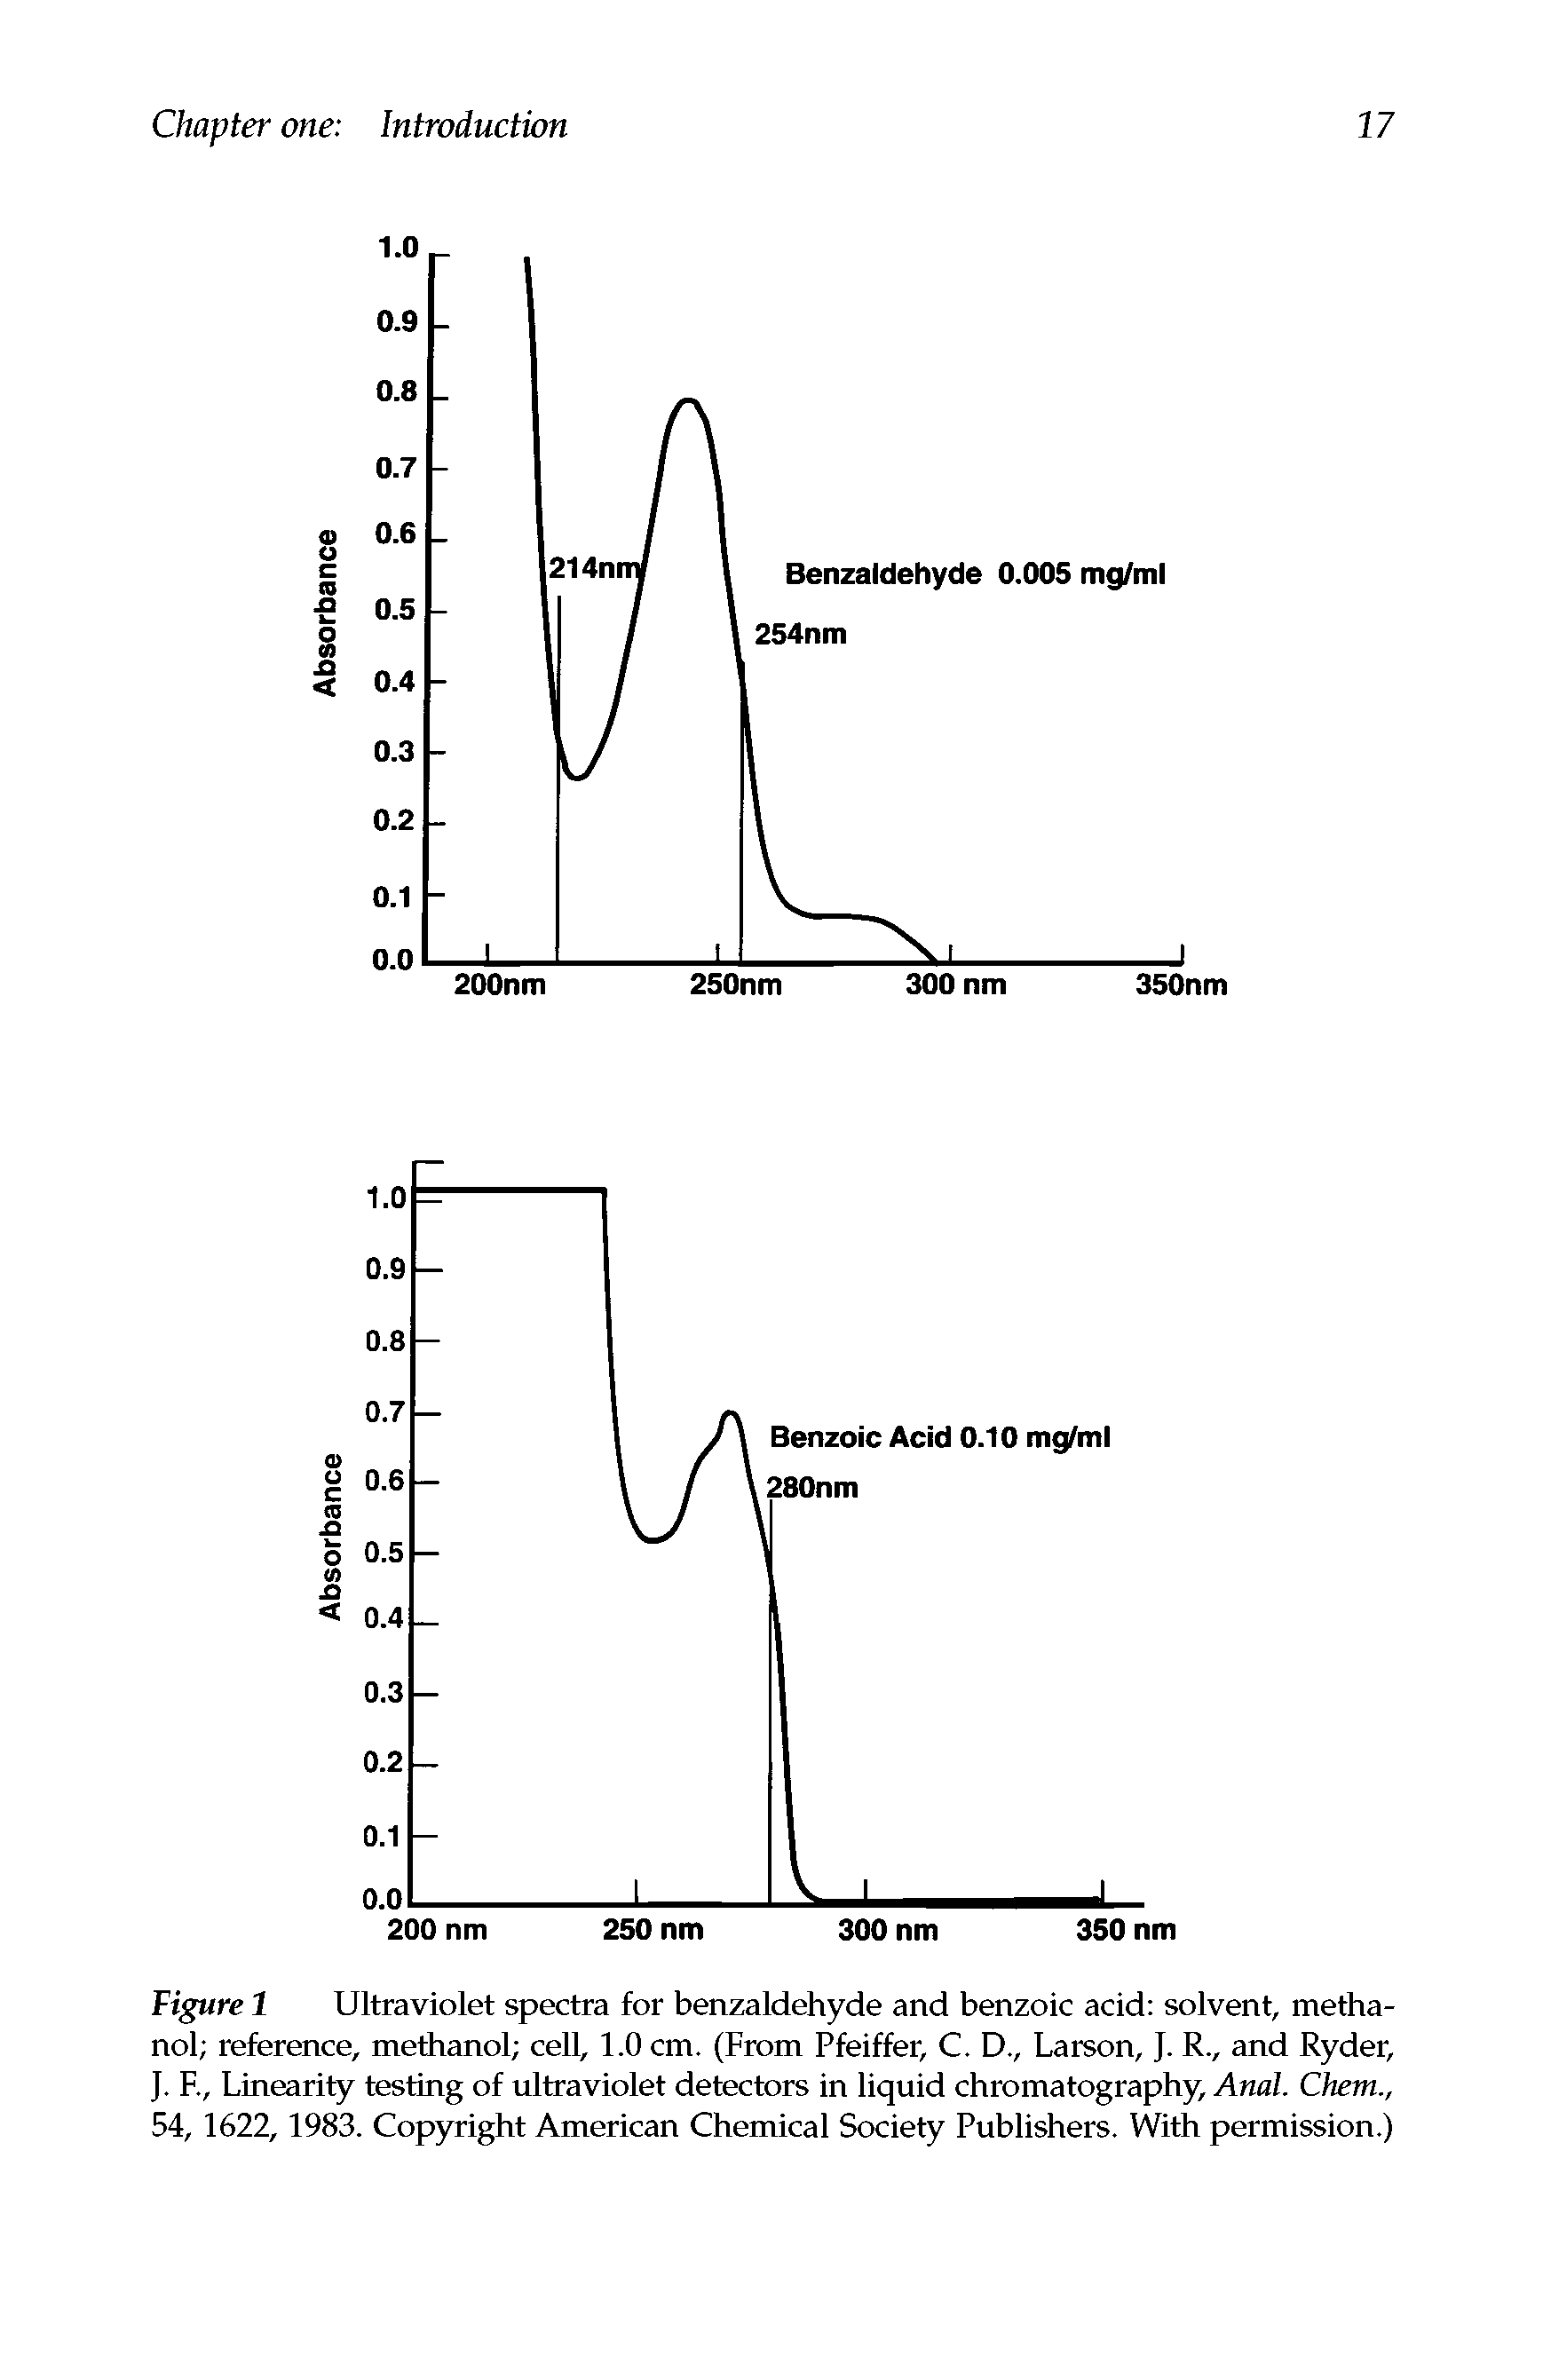 Figure 1 Ultraviolet spectra for benzaldehyde and benzoic acid solvent, methanol reference, methanol cell, 1.0 cm. (From Pfeiffer, C. D., Larson, J. R., and Ryder, J. F., Linearity testing of ultraviolet detectors in liquid chromatography, Anal. Chem., 54, 1622, 1983. Copyright American Chemical Society Publishers. With permission.)...